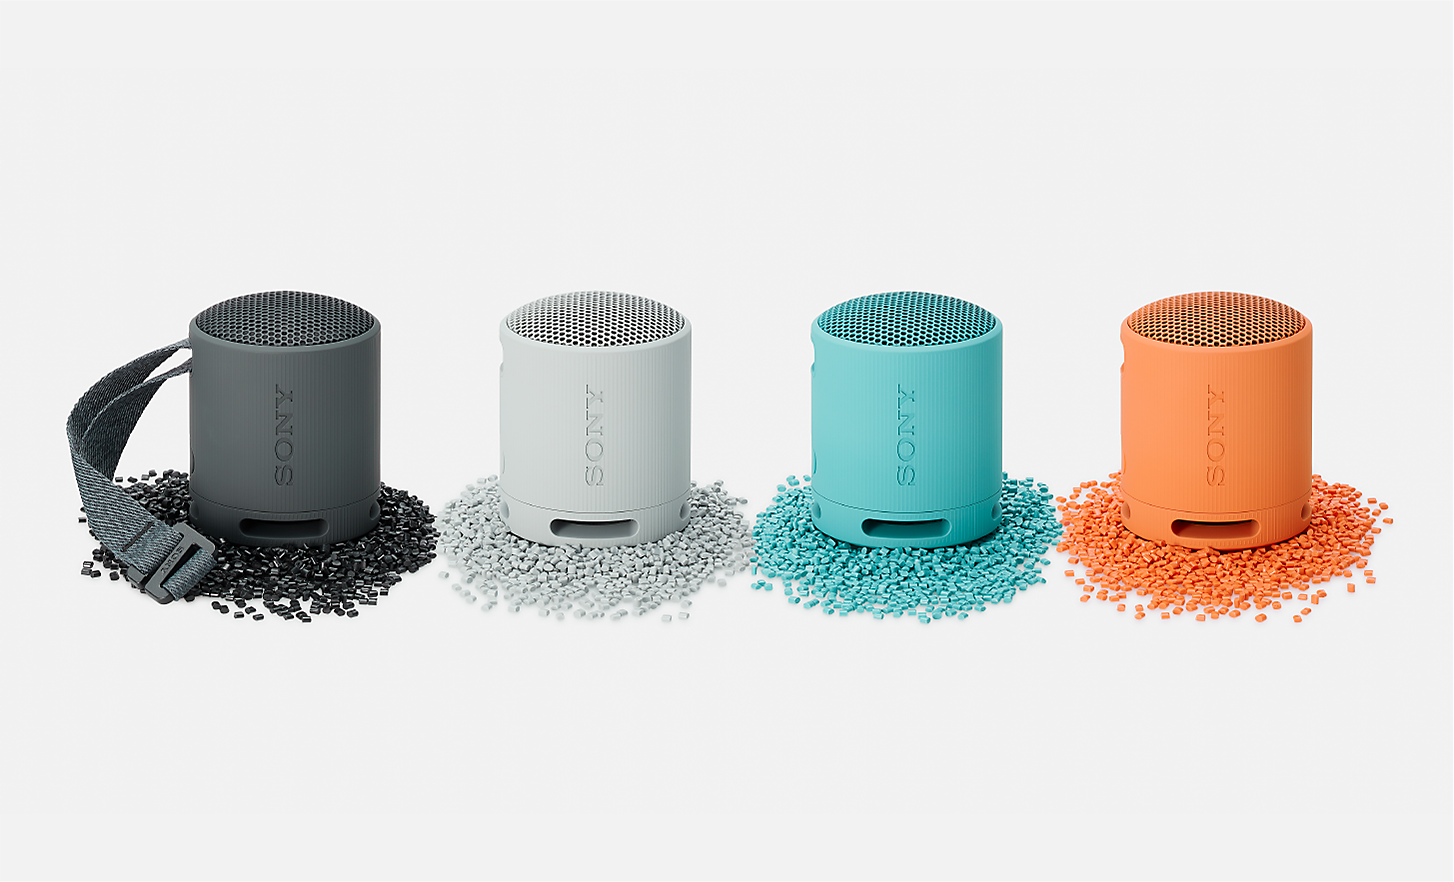 Image of the black, white, blue and orange SRS-XB100 speakers sitting on granules of matching coloured plastic